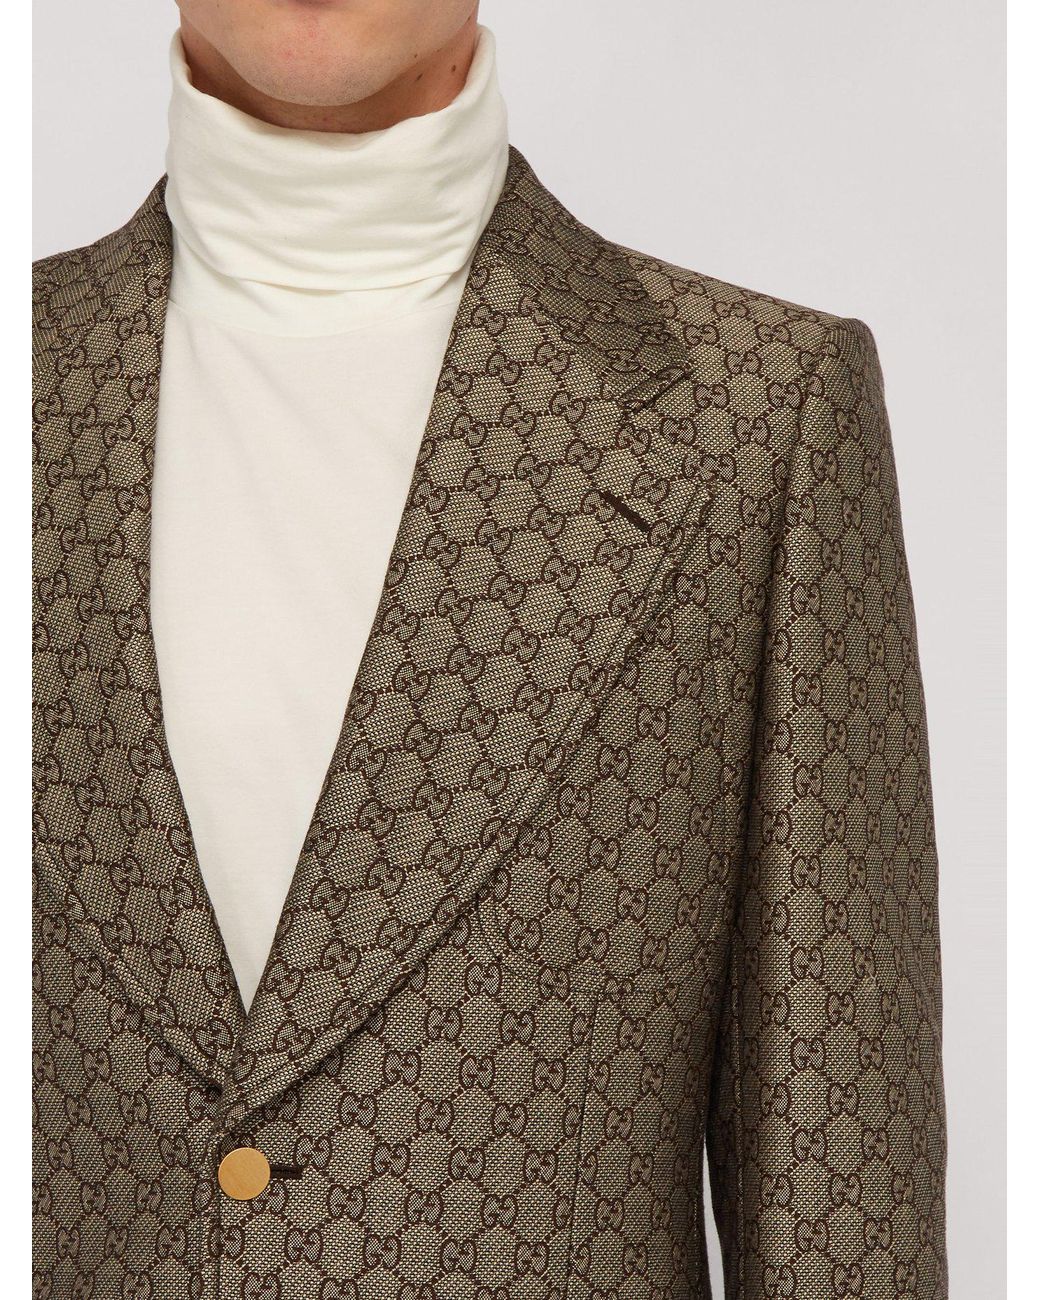 Gucci Gg Monogram Single Breasted Suit Jacket in Natural for Men | Lyst